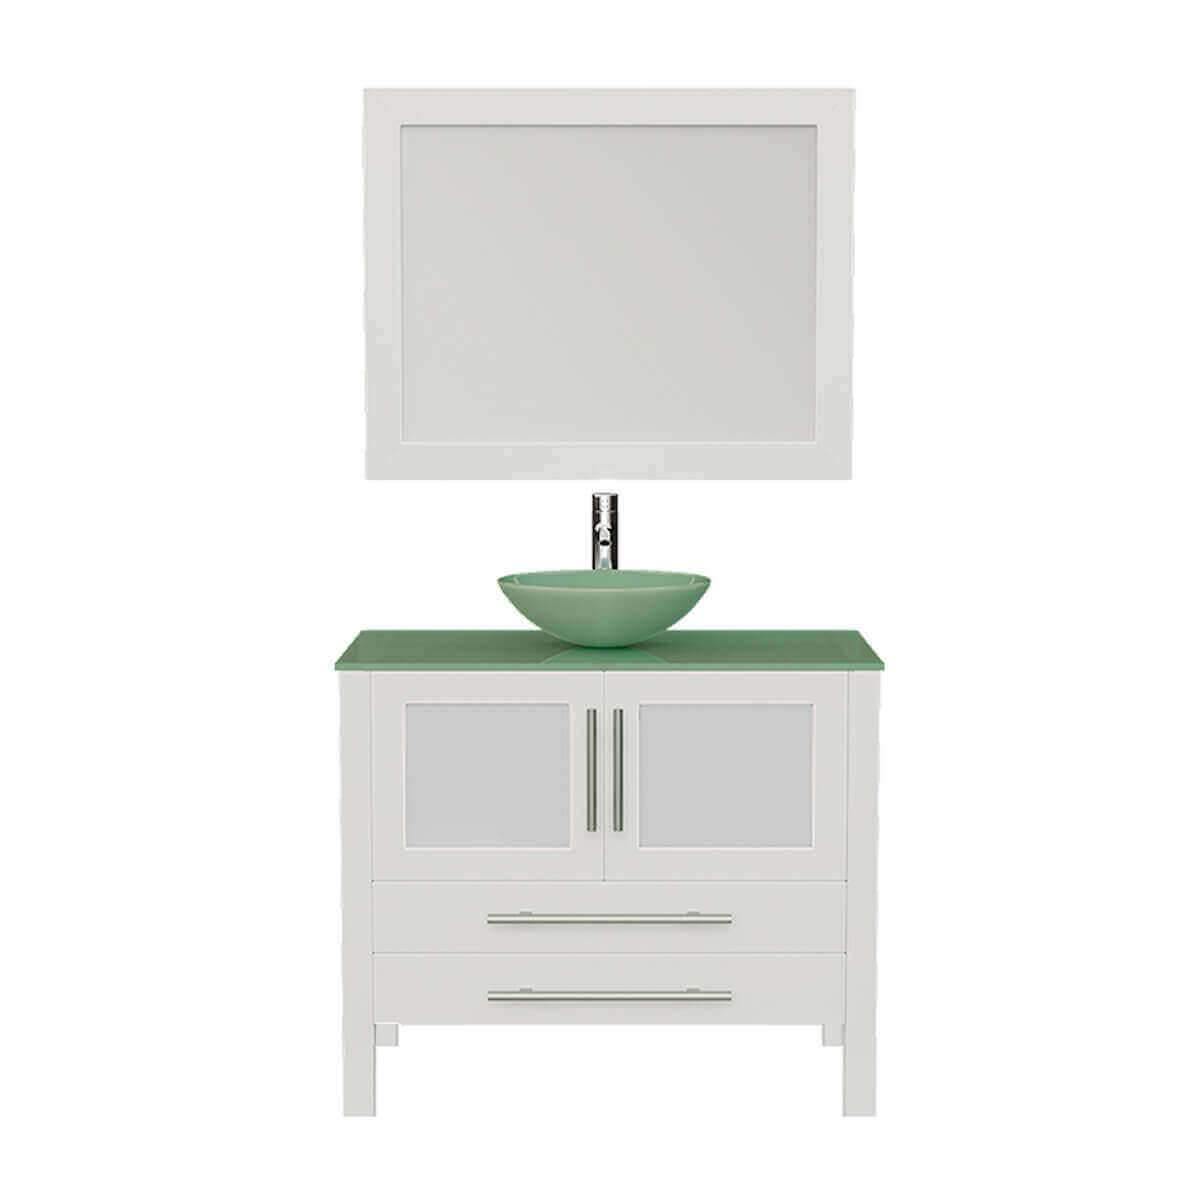 Cambridge Plumbing 36" White Solid Wood & Glass Single Vessel Sink Vanity Set with Polished Chrome Faucet and Drain 8111BW-CP #faucet finish_polished chrome